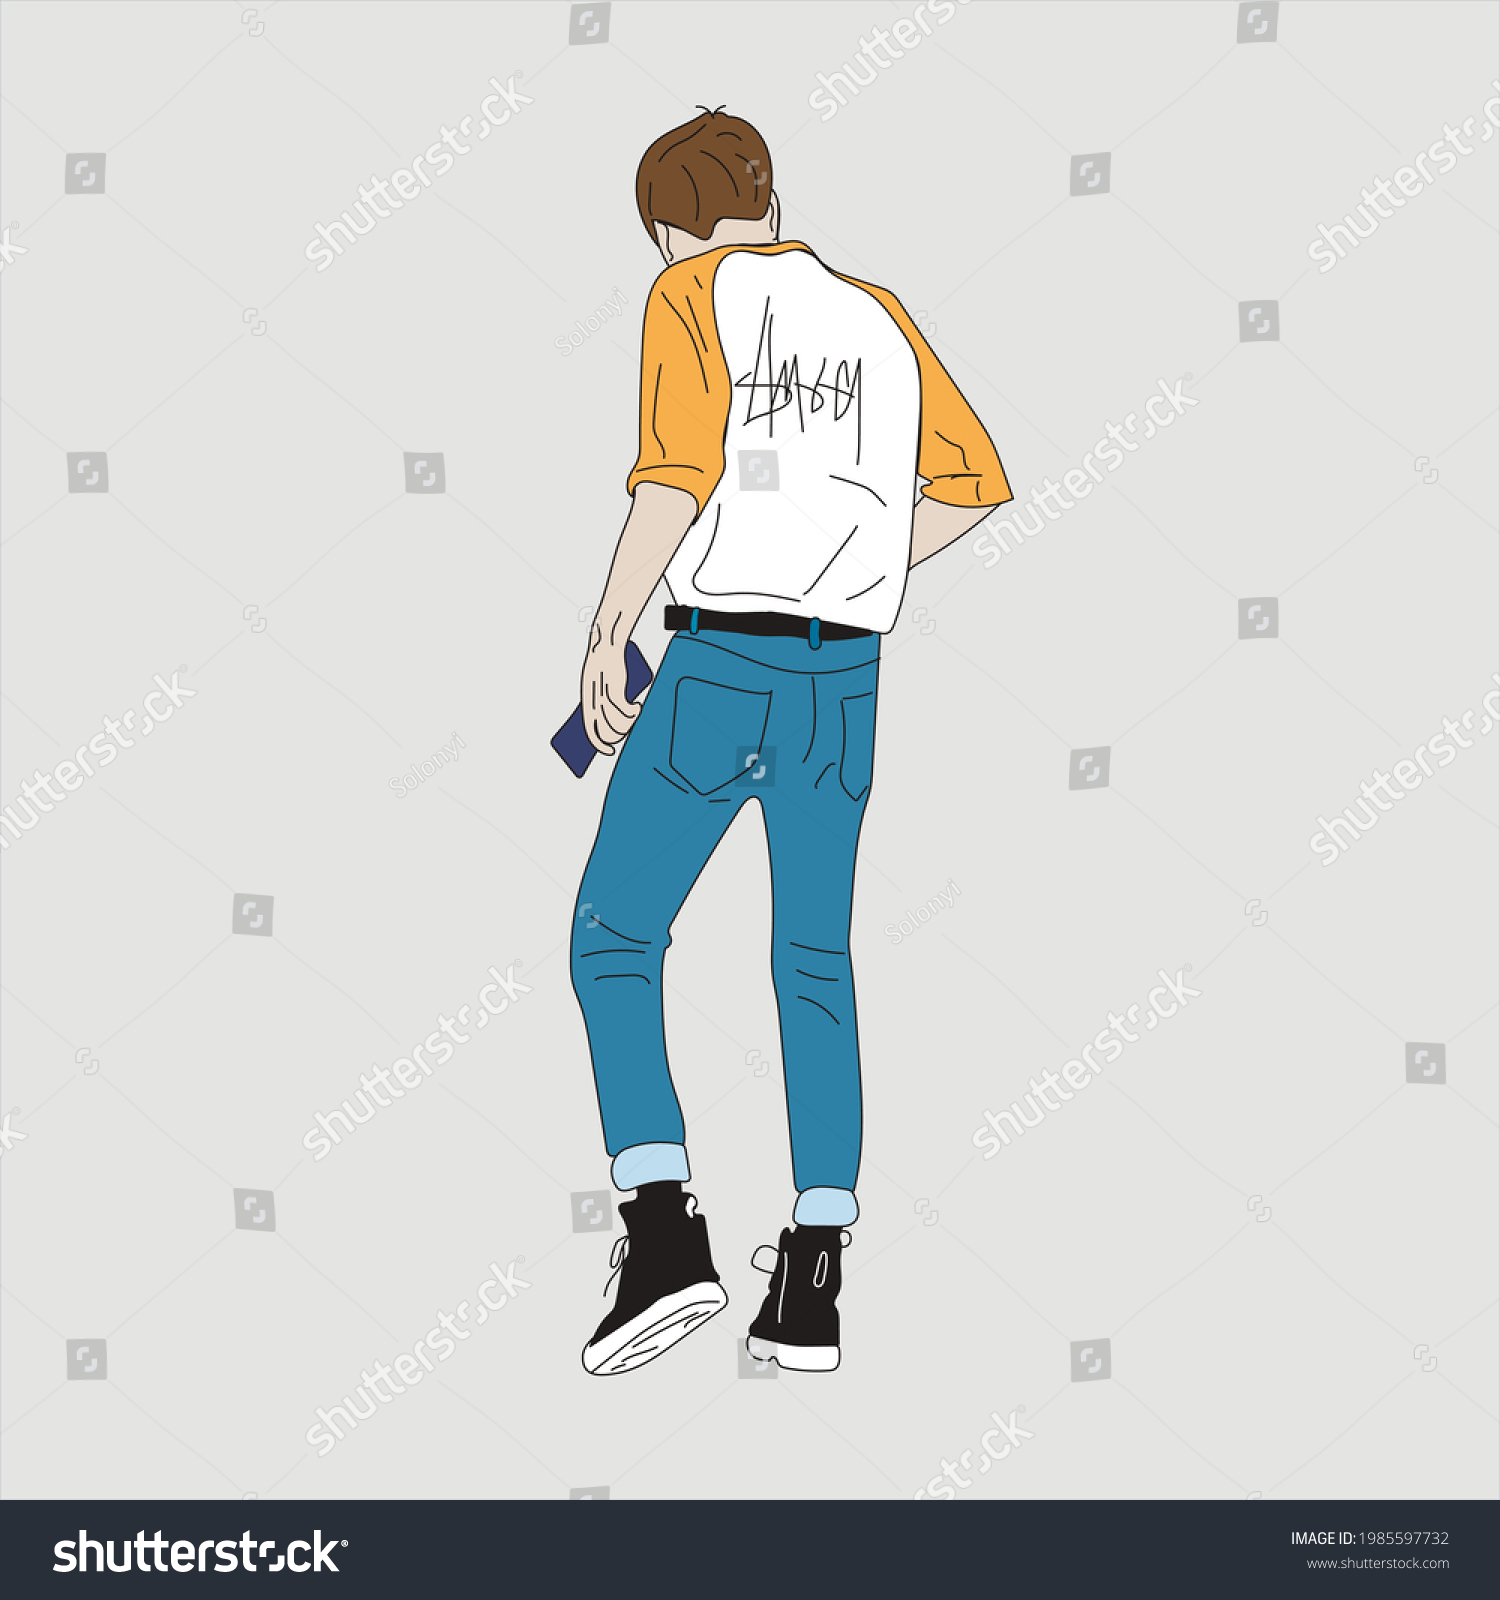 SVG of Vector illustration of Kpop street fashion. Street idols of Koreans. Kpop men's fashion idol. A guy in jeans and a white sweatshirt with yellow sleeves. svg